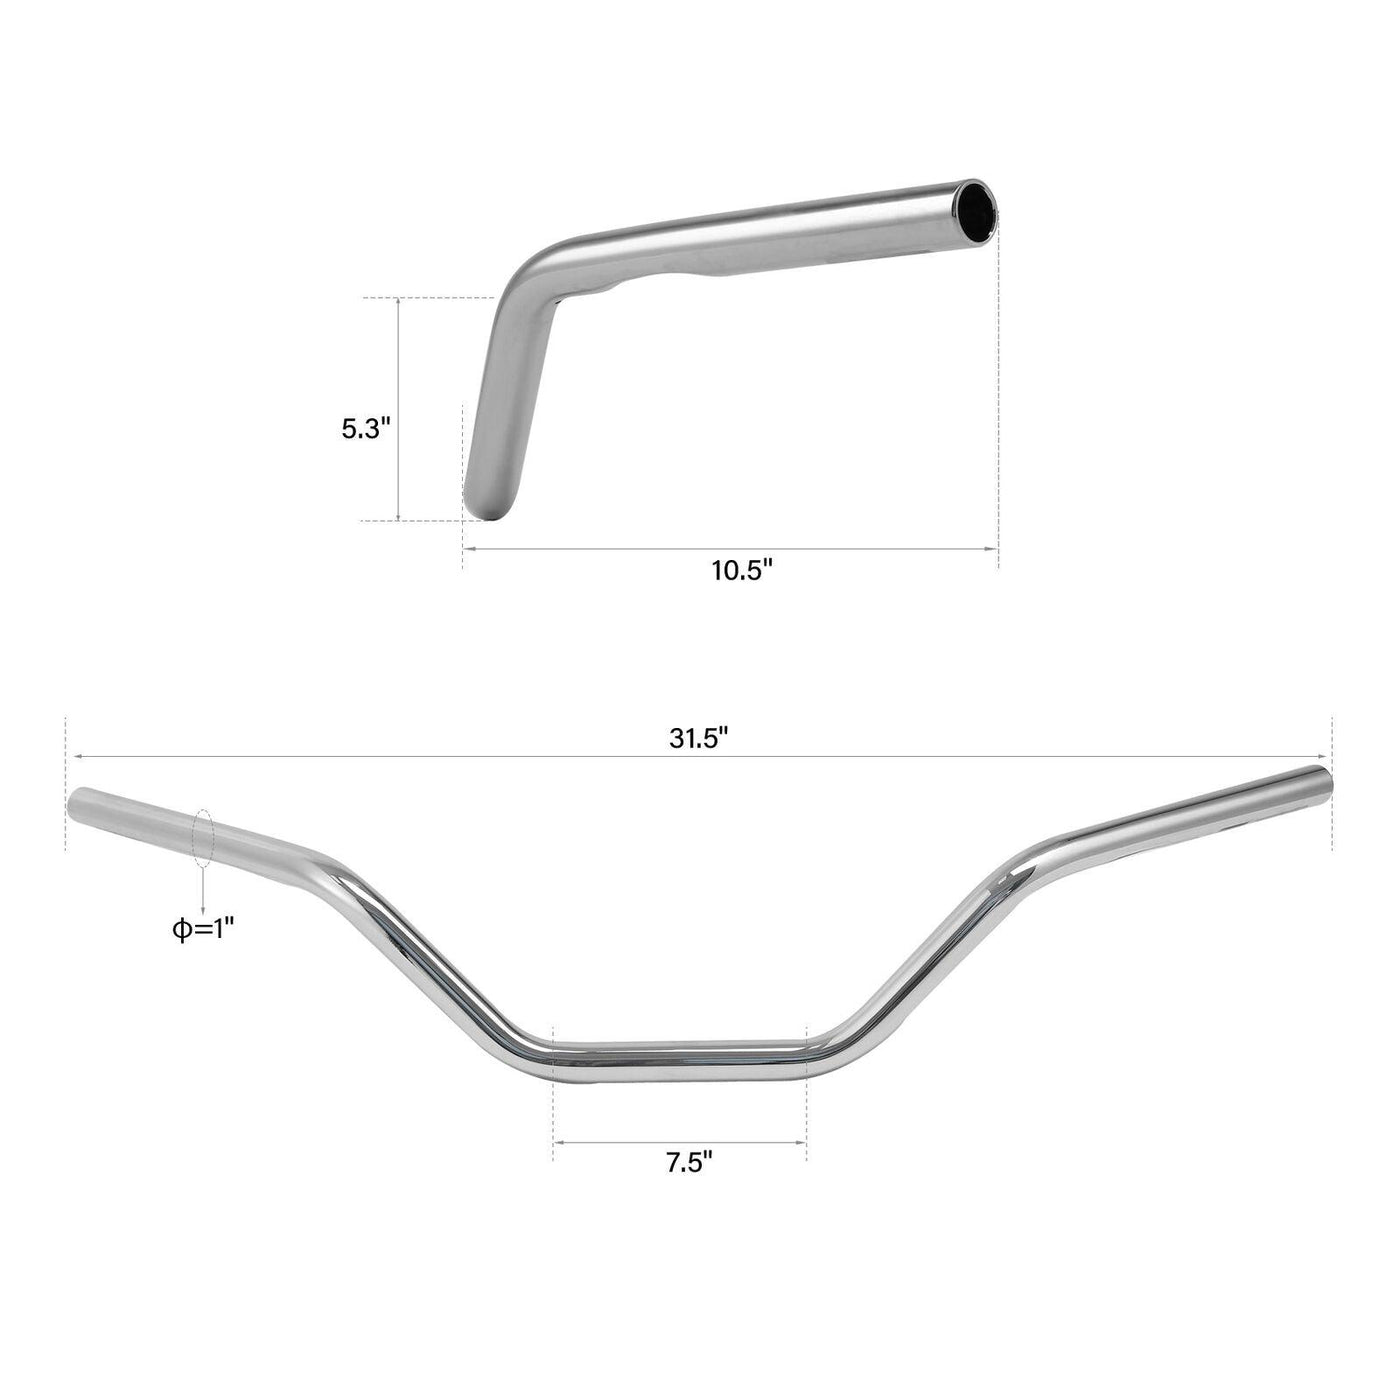 Chrome 5'' Rise 1" Ape Hanger Bar Handlebar Fit For Harley Sportster XL1200 Dyna - Moto Life Products